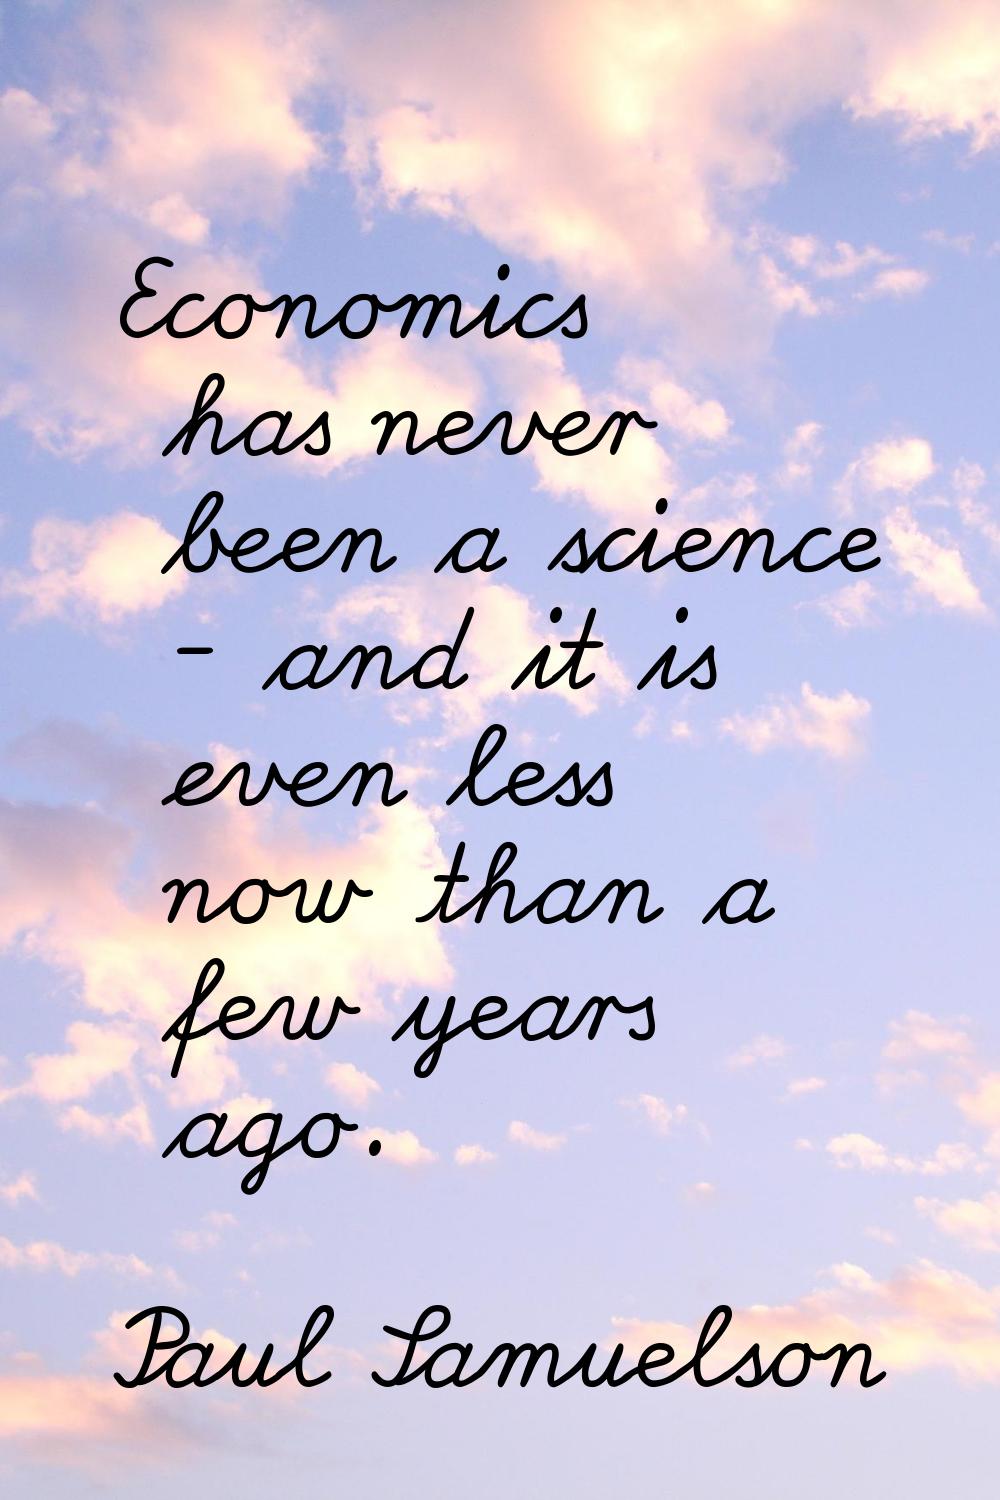 Economics has never been a science - and it is even less now than a few years ago.